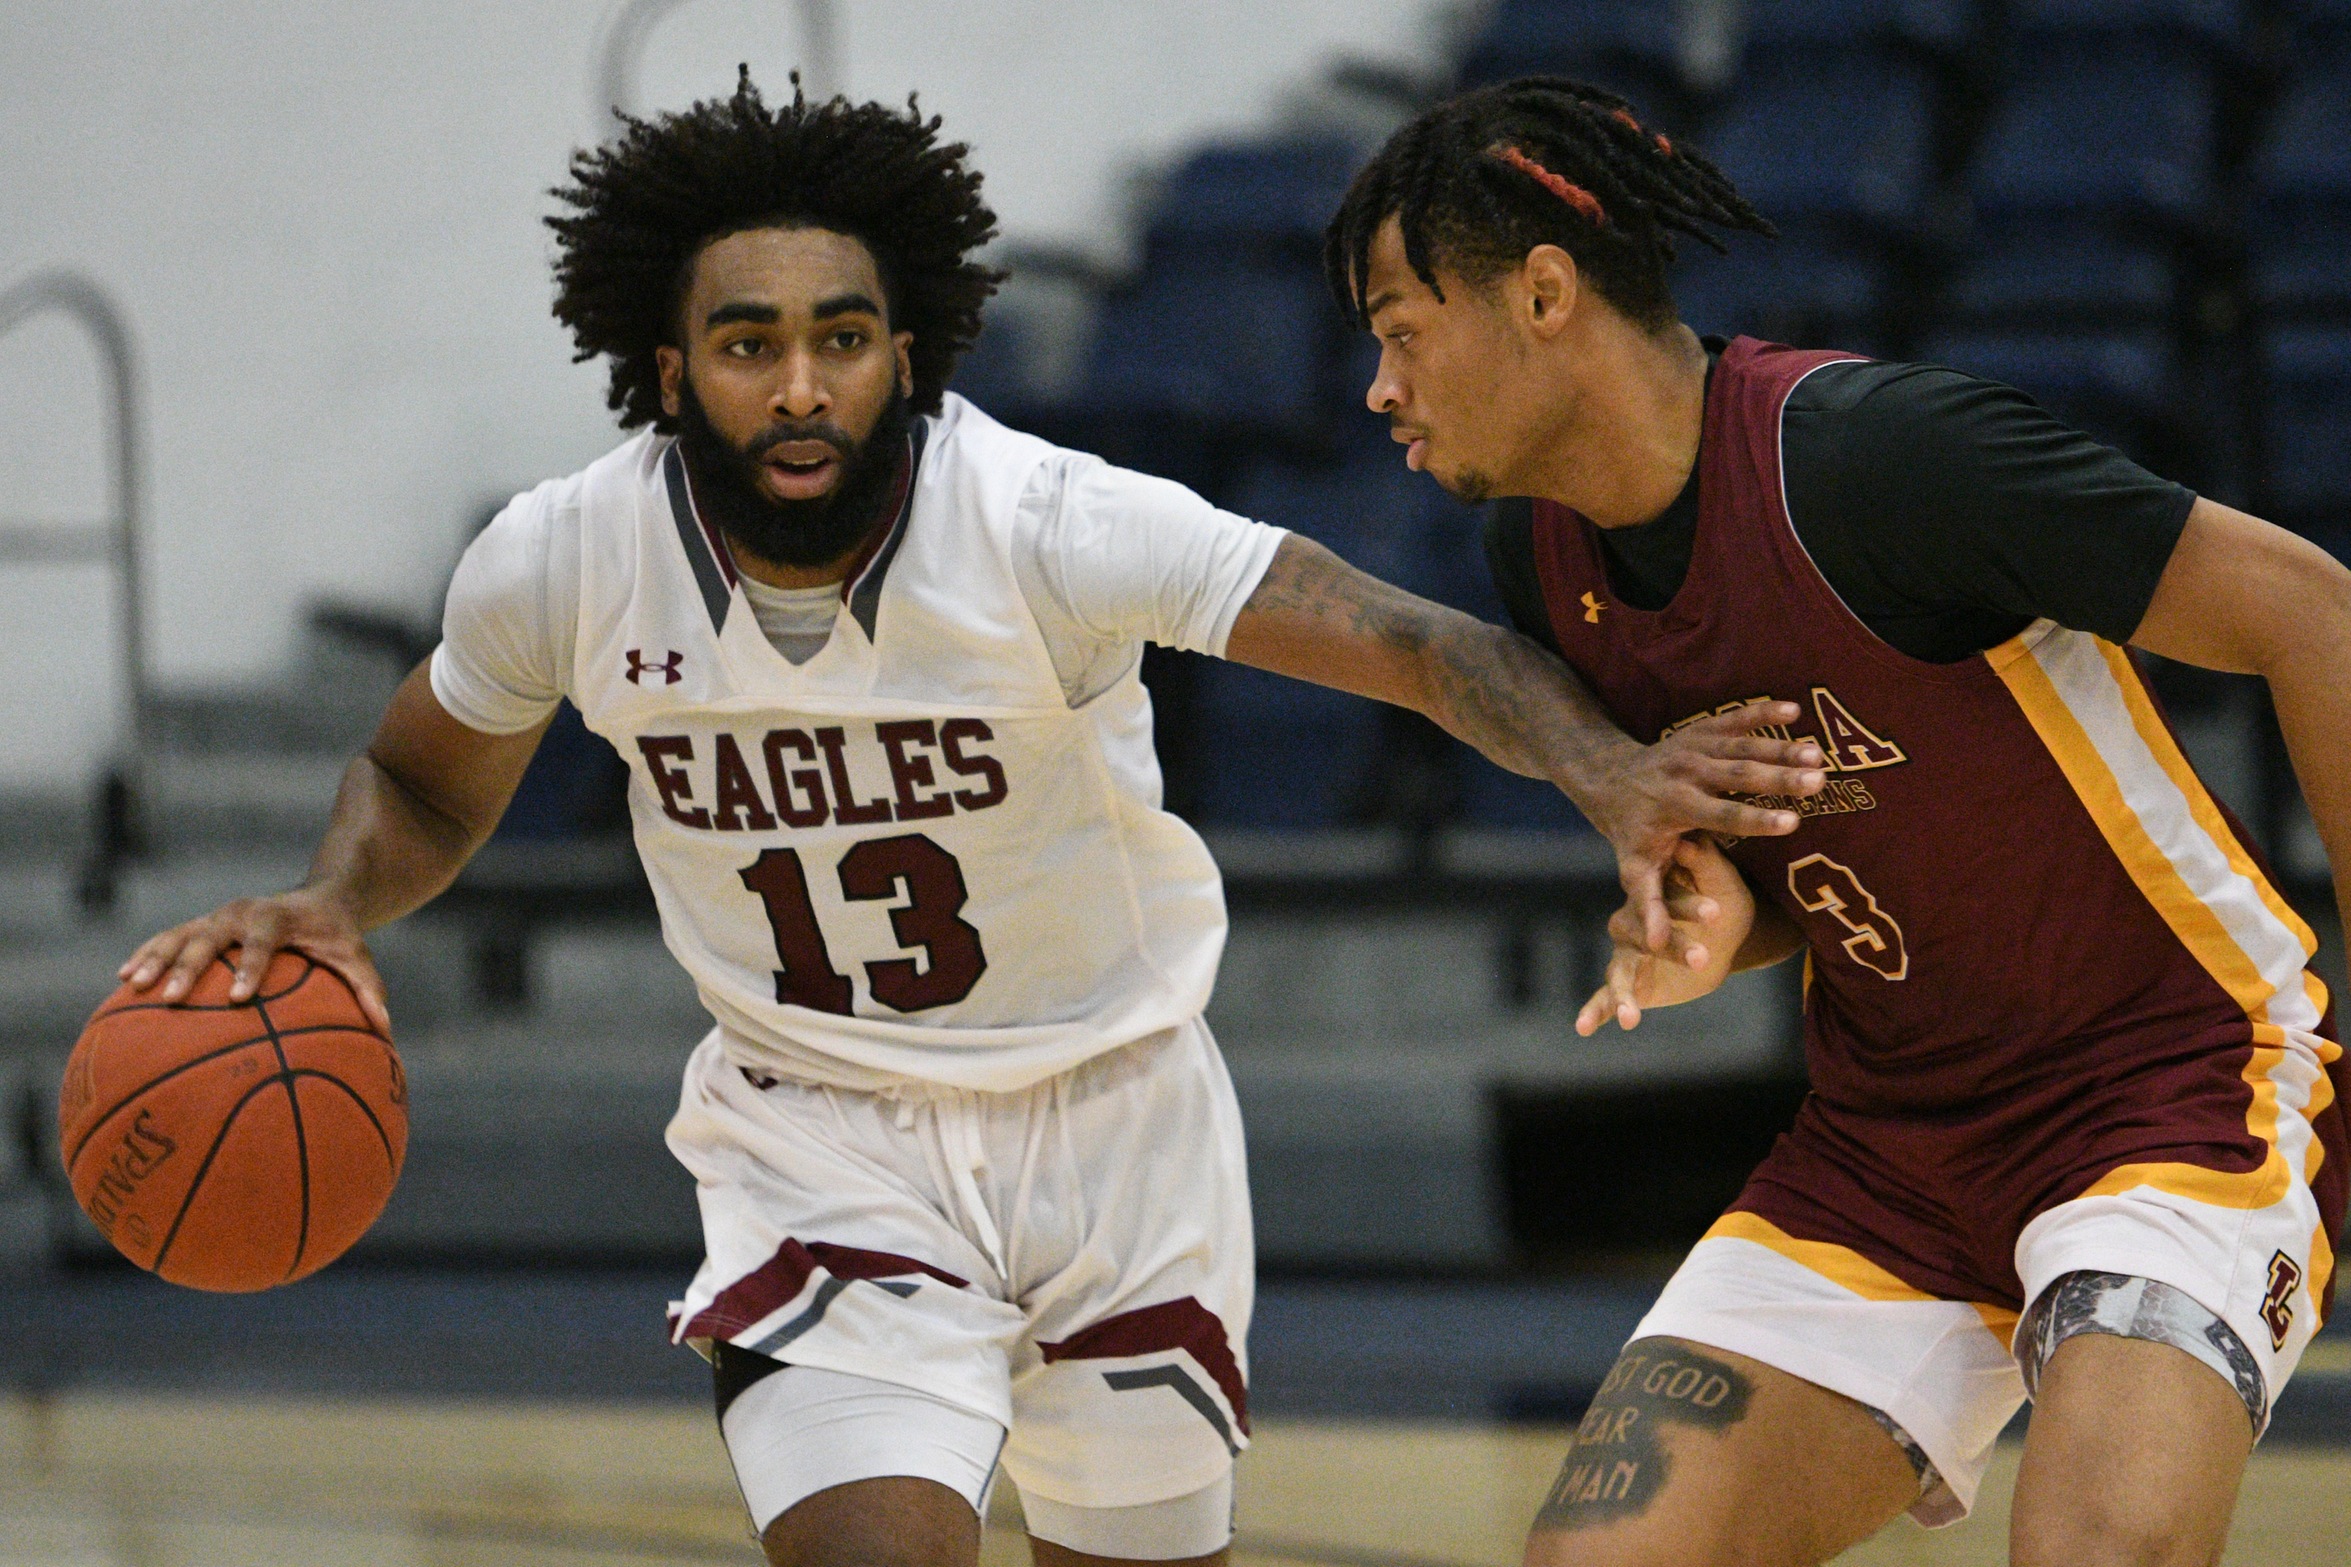 TAMUT senior Zeigler selected for RRAC All-Conference Second Team